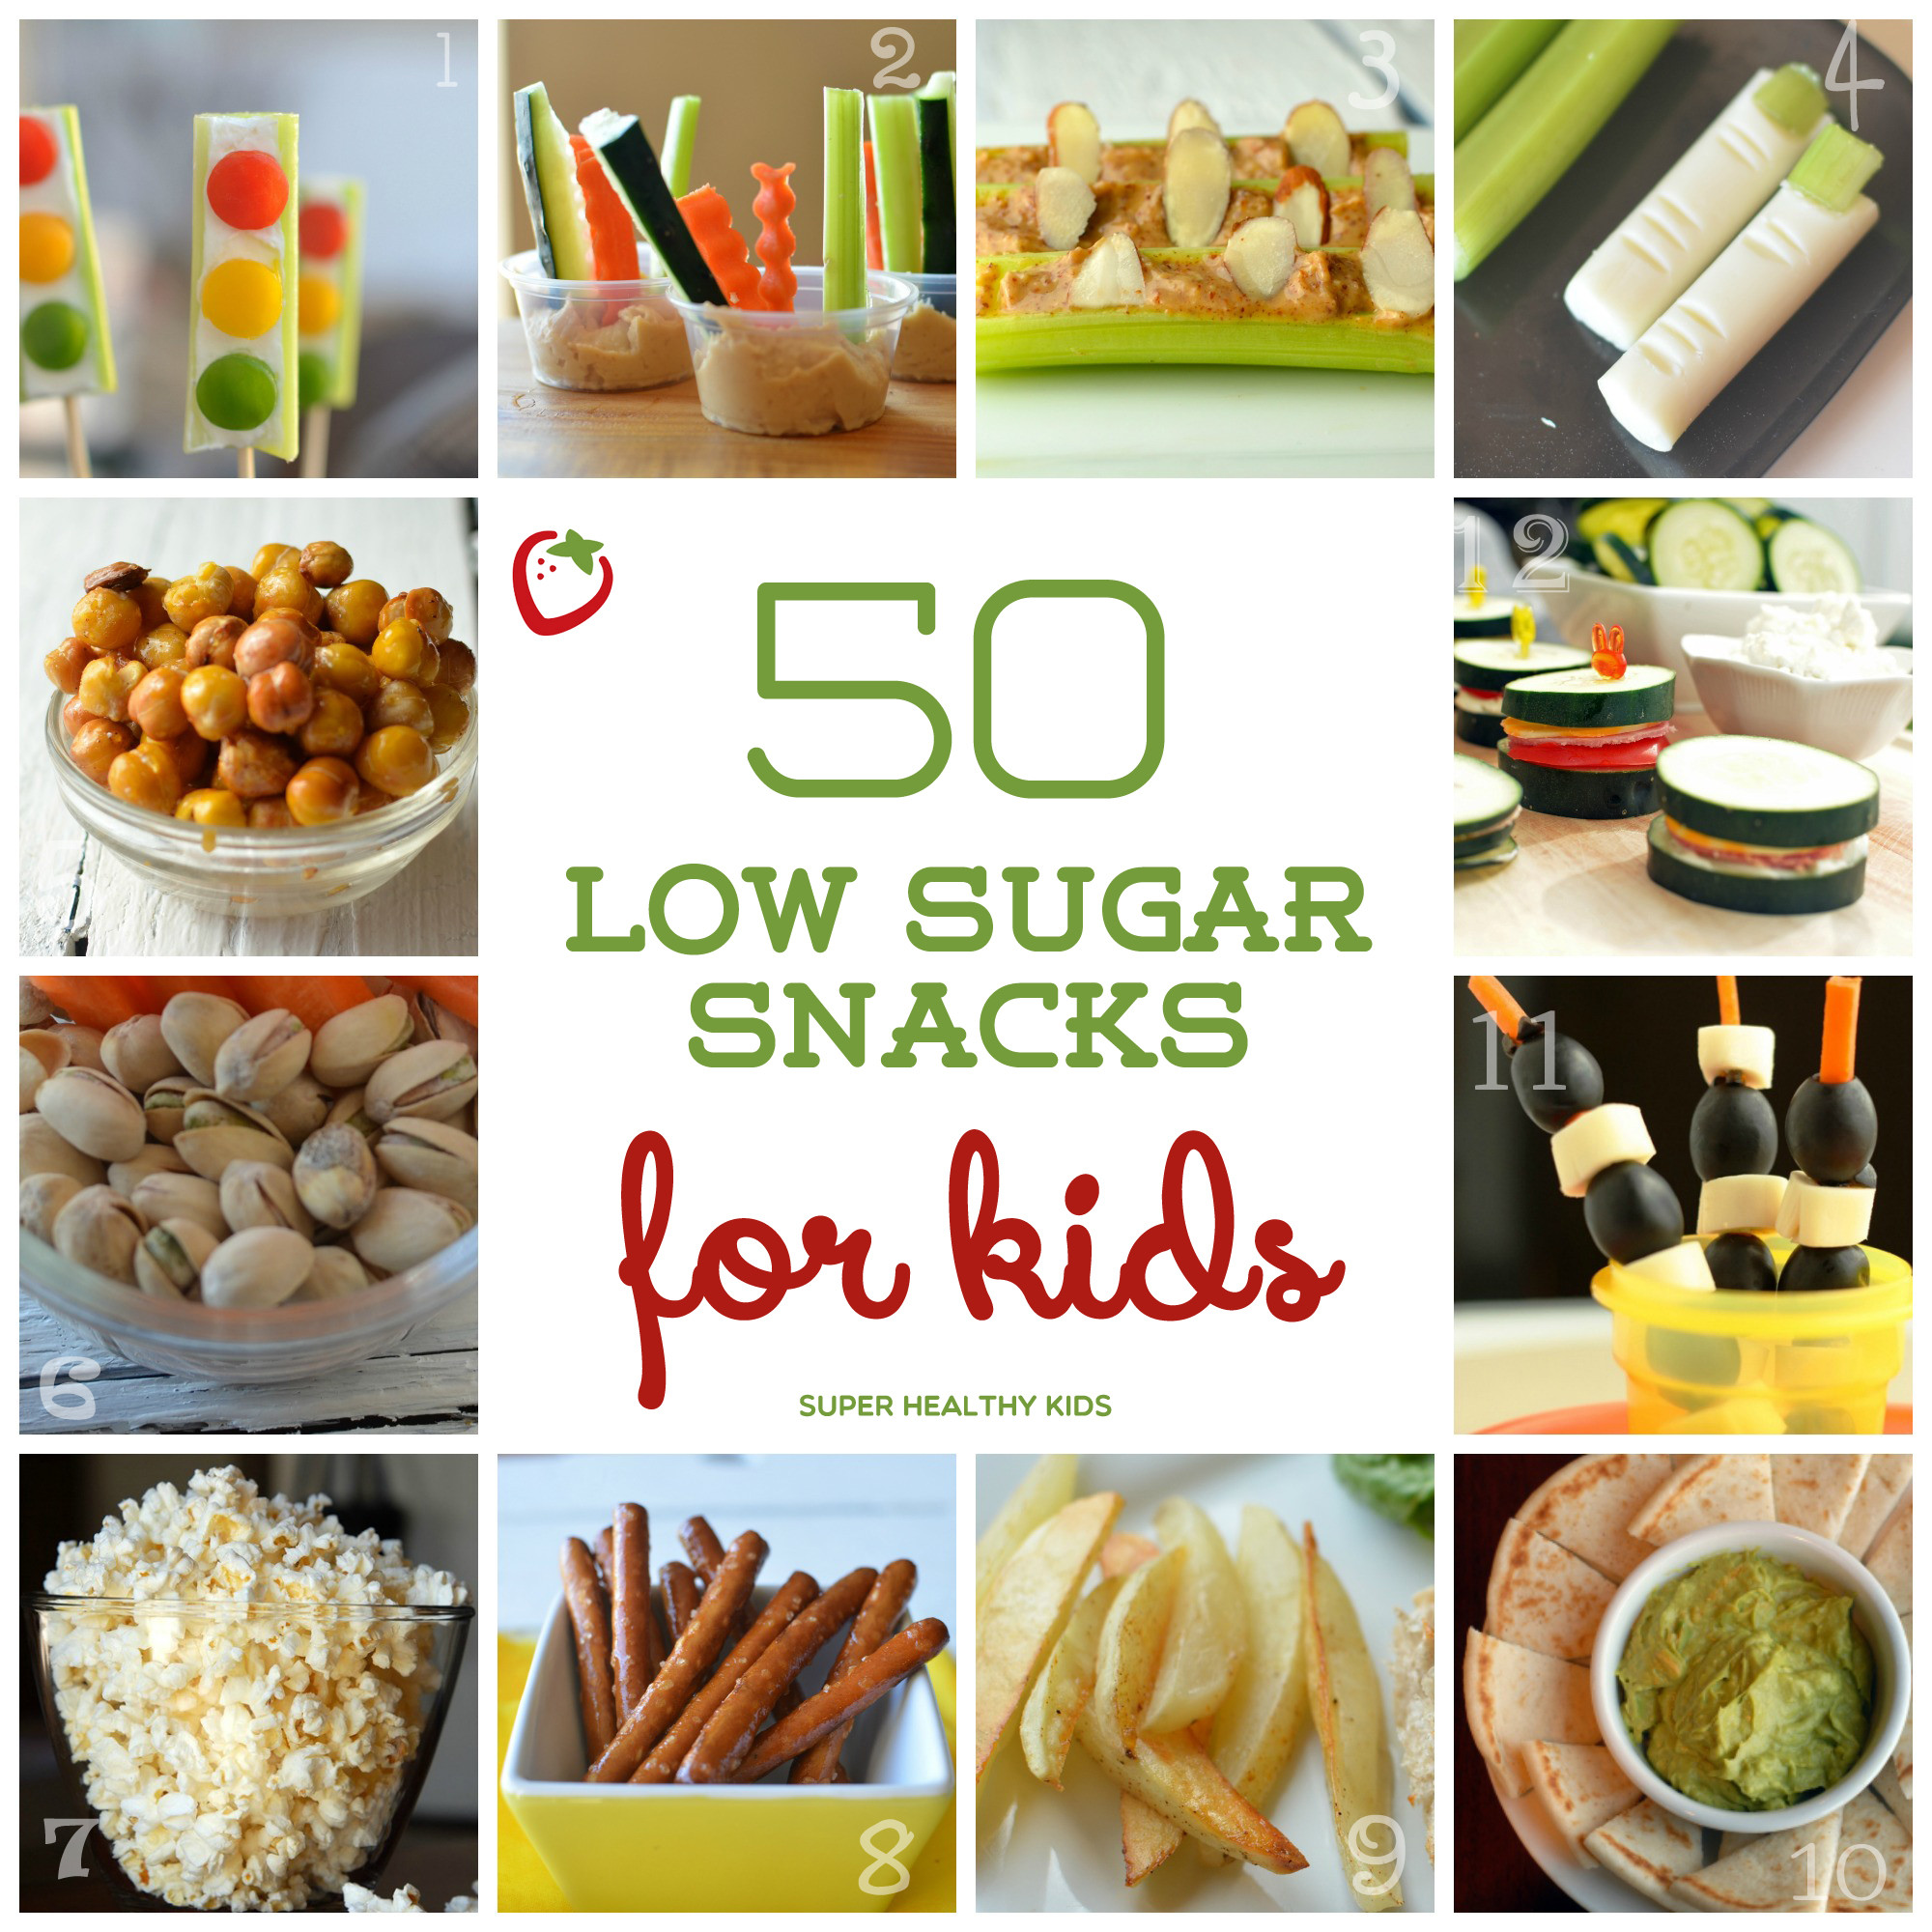 Low Sugar Healthy Snacks 20 Of the Best Ideas for 50 Low Sugar Snacks for Kids